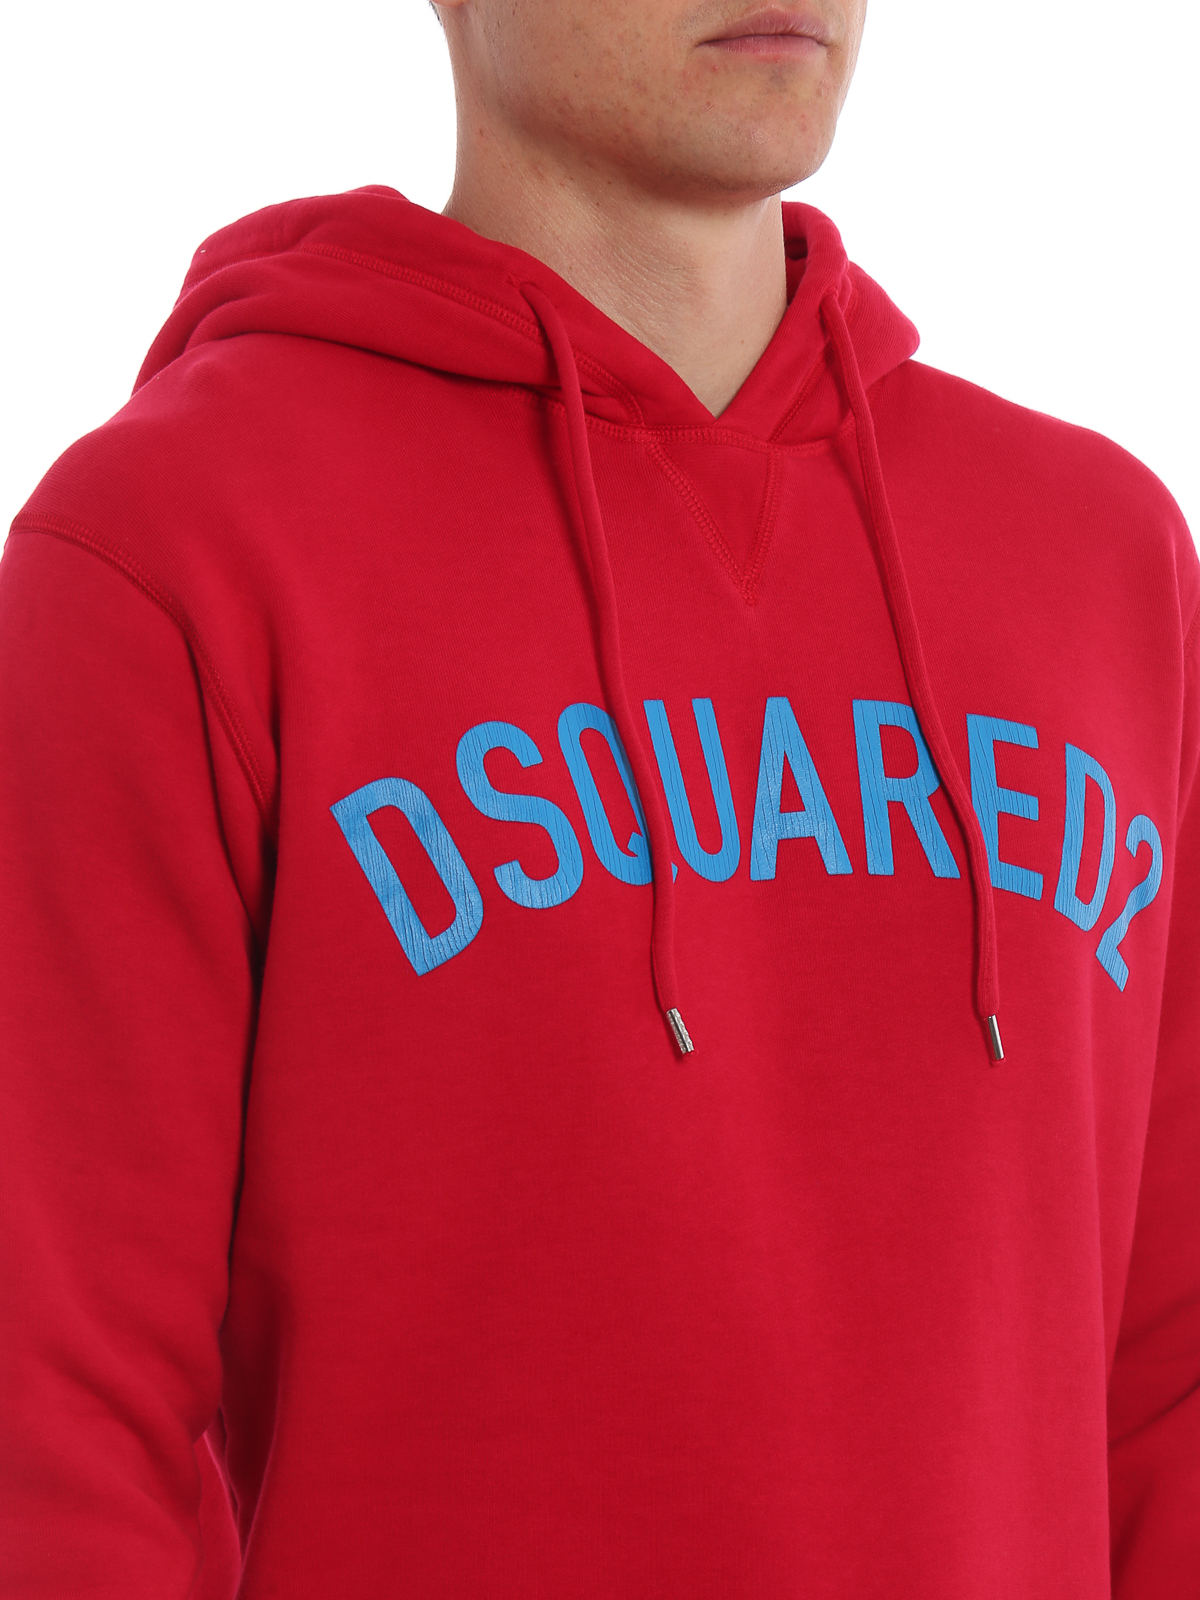 dsquared2 red